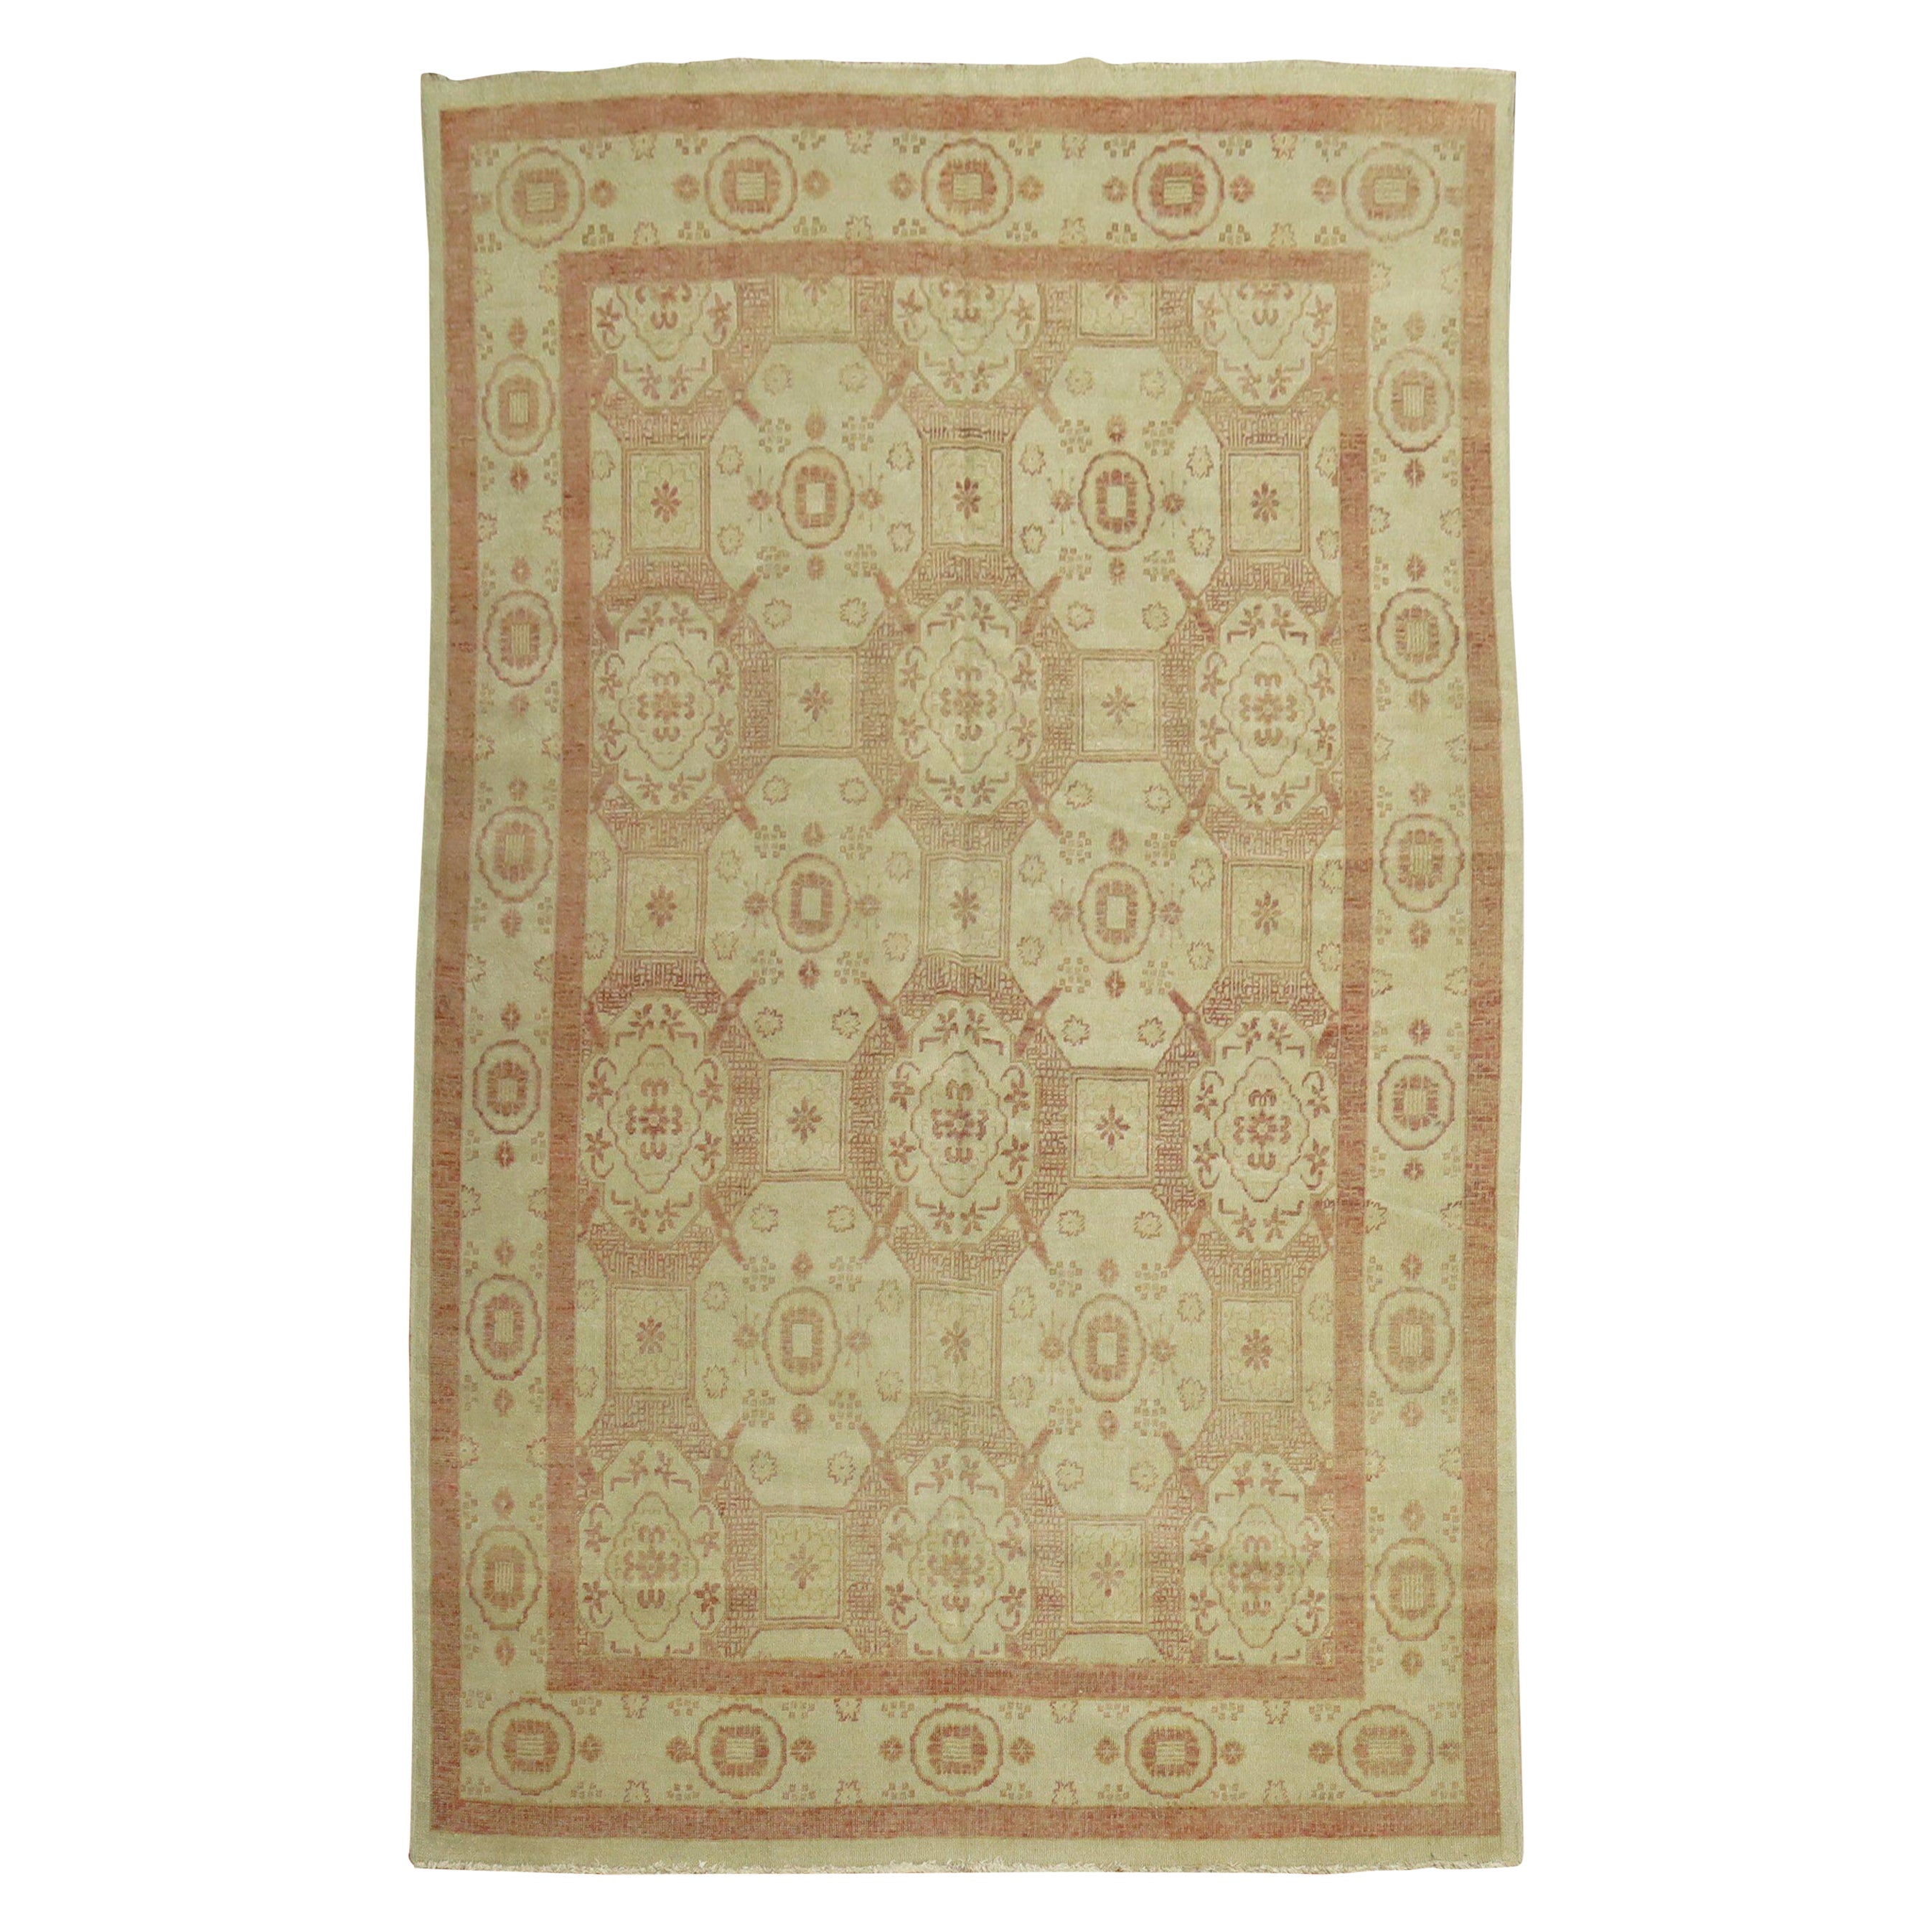 Anglo-Japanese Central Asian Rugs